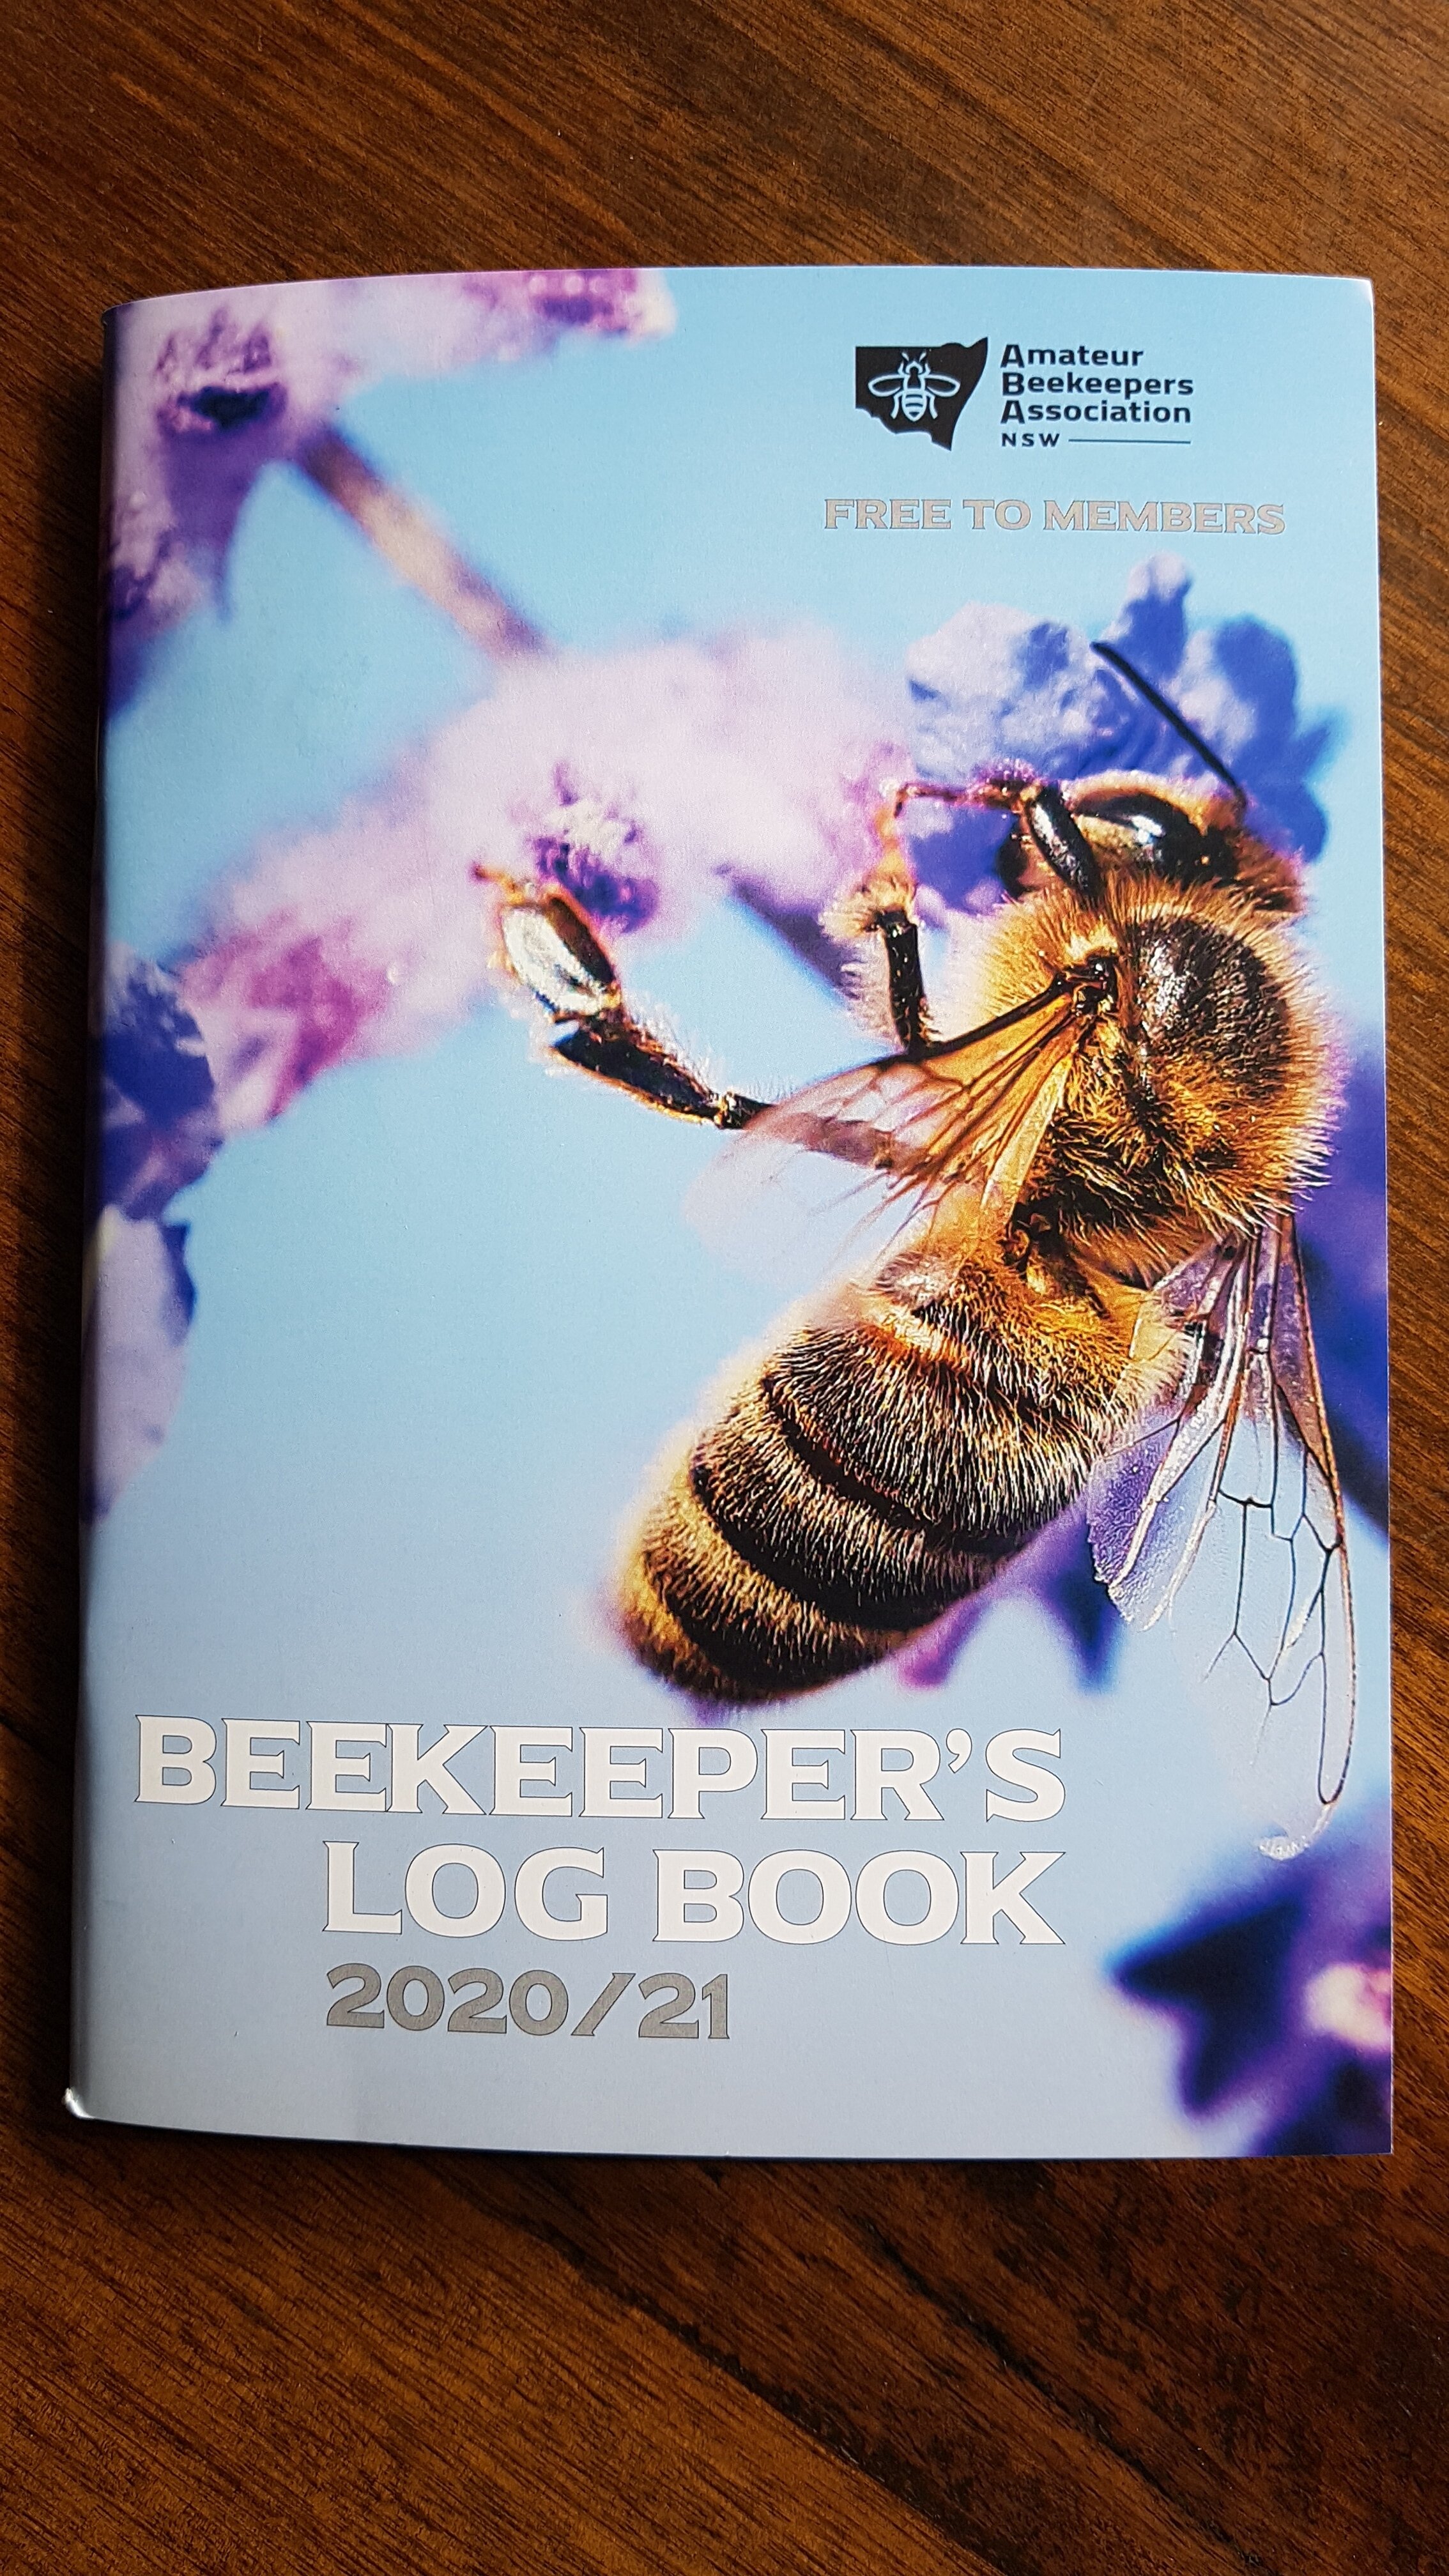 ABA Conference 2019 — Amateur Beekeepers Association NSW